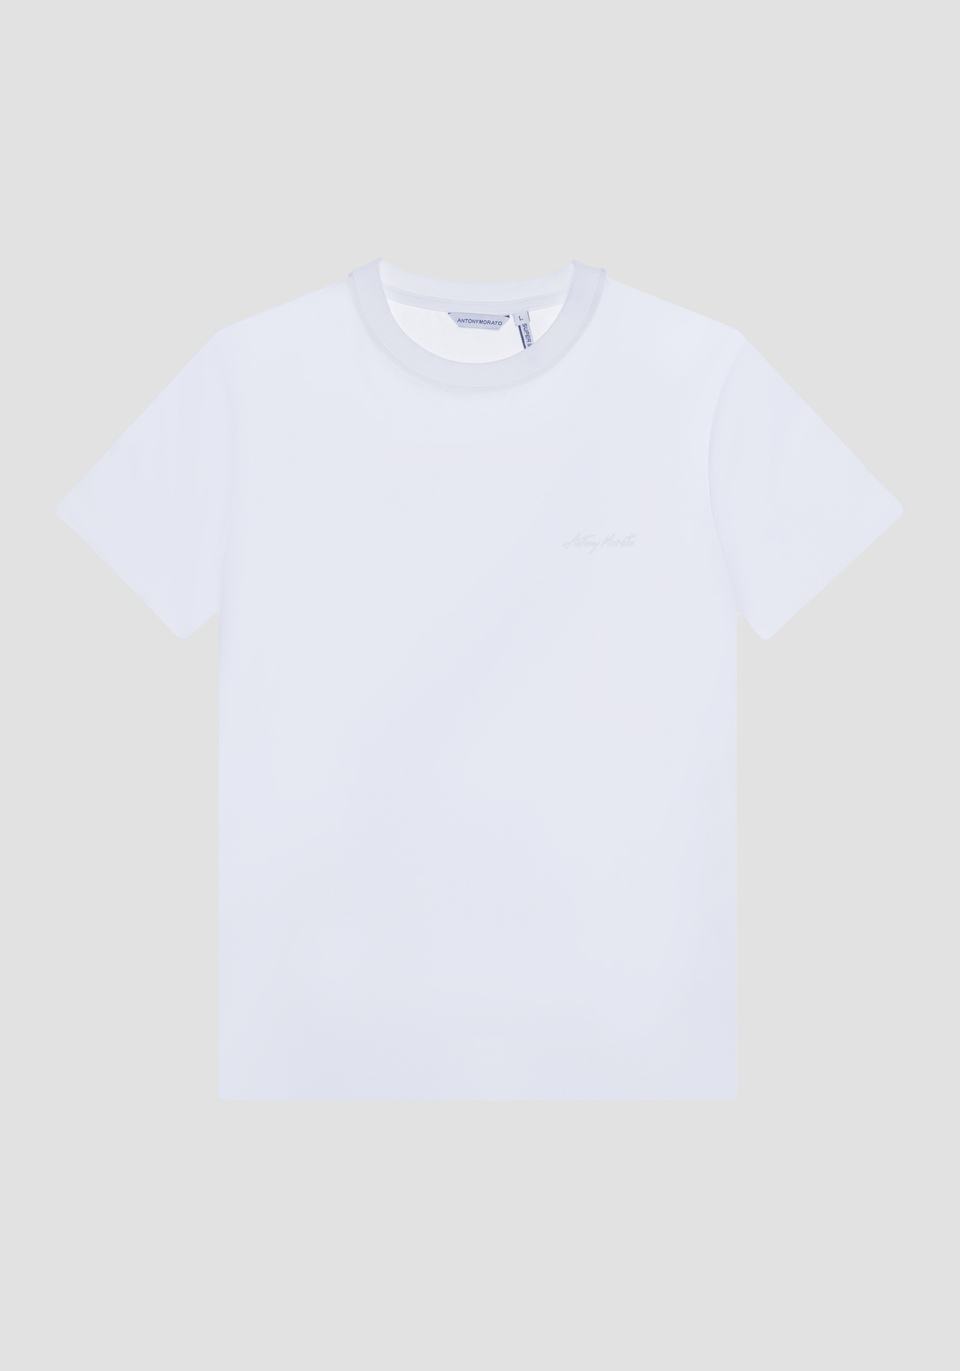 REGULAR FIT T-SHIRT IN SUSTAINABLE VISCOSE WITH LOGO PRINT - Antony Morato Online Shop